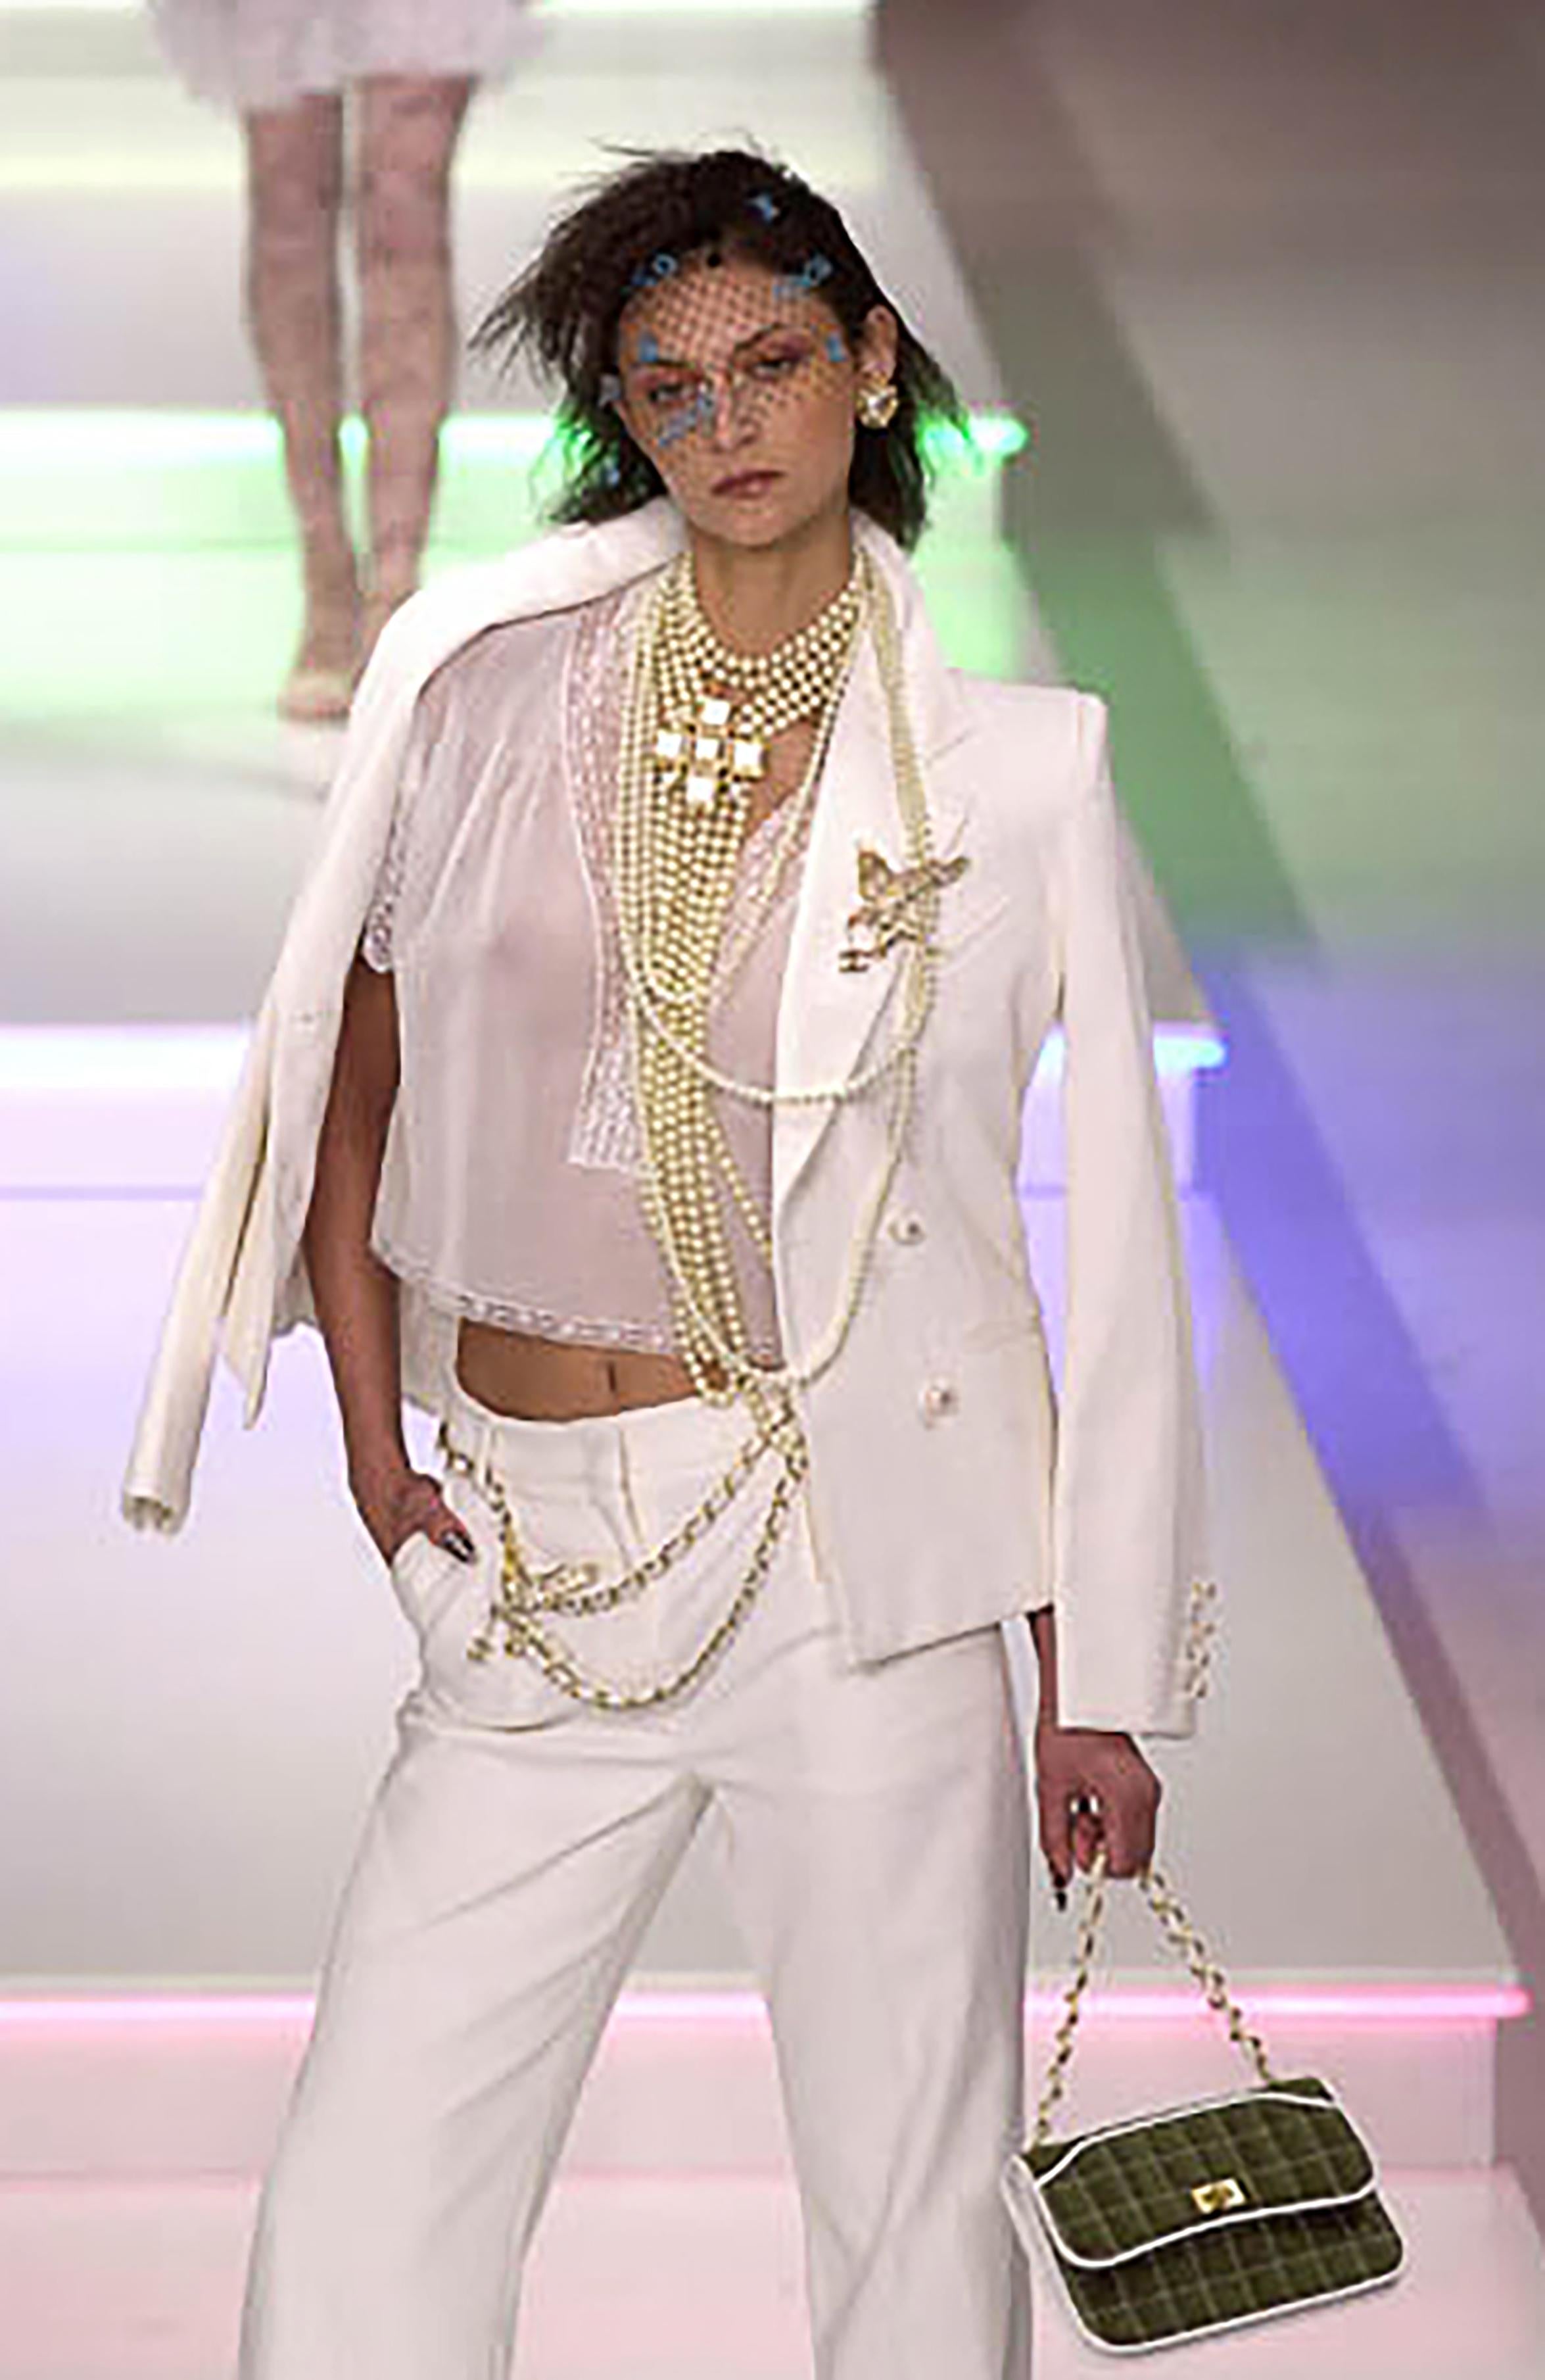 S/S 2001 Chanel by Karl Lagerfeld double-breasted white suit set. Double-breasted blazer jacket with stamped pearl buttons. Mid-rise trousers with slight flare. Suit featured on the runway, and on Renee Zellweger for 